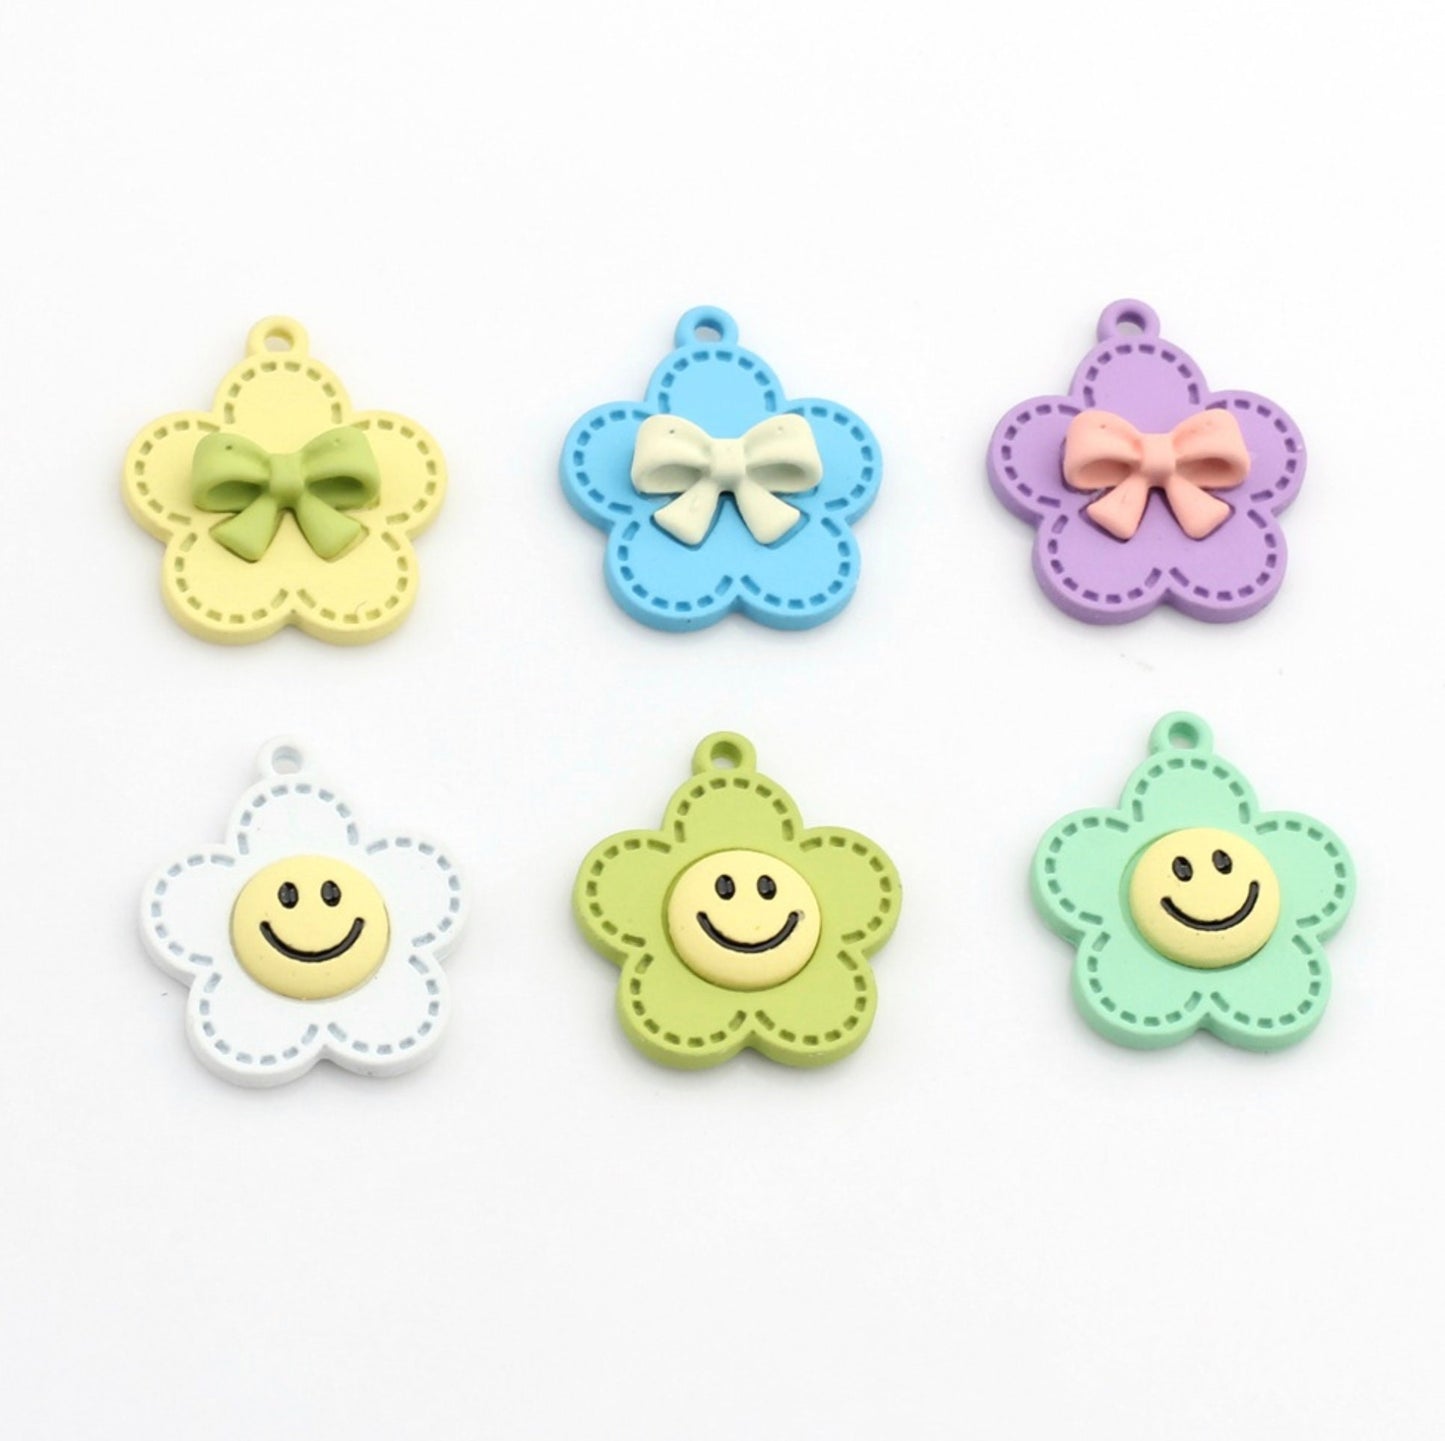 19MM x 17MM Zinc Alloy Happy Flower and Bow Themed Floral Charms